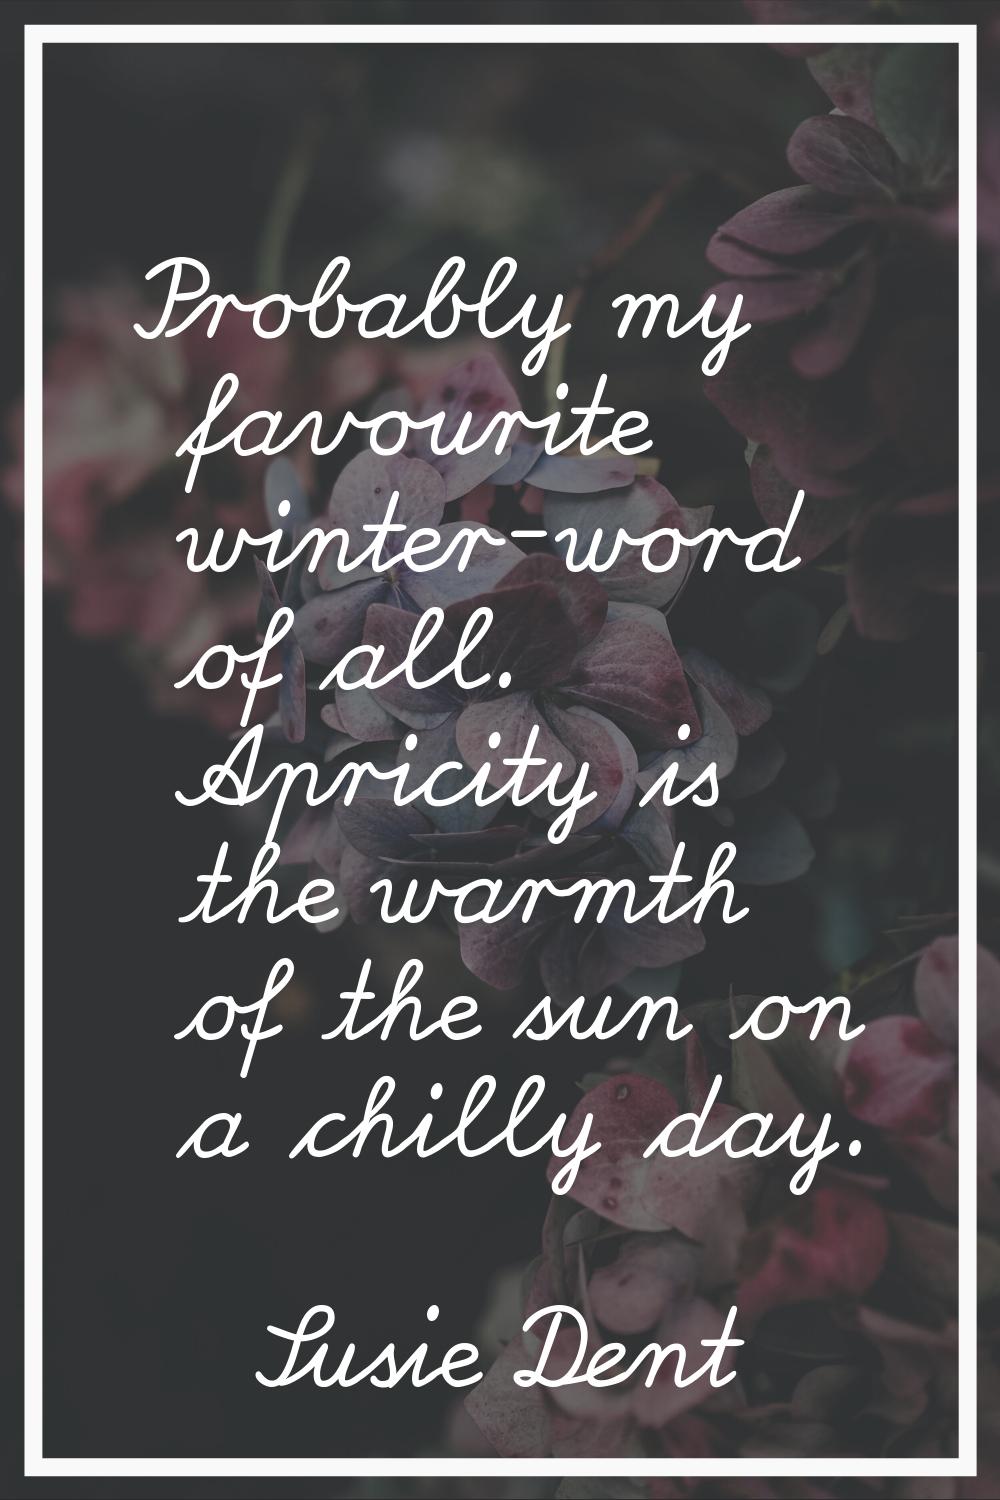 Probably my favourite winter-word of all. Apricity is the warmth of the sun on a chilly day.